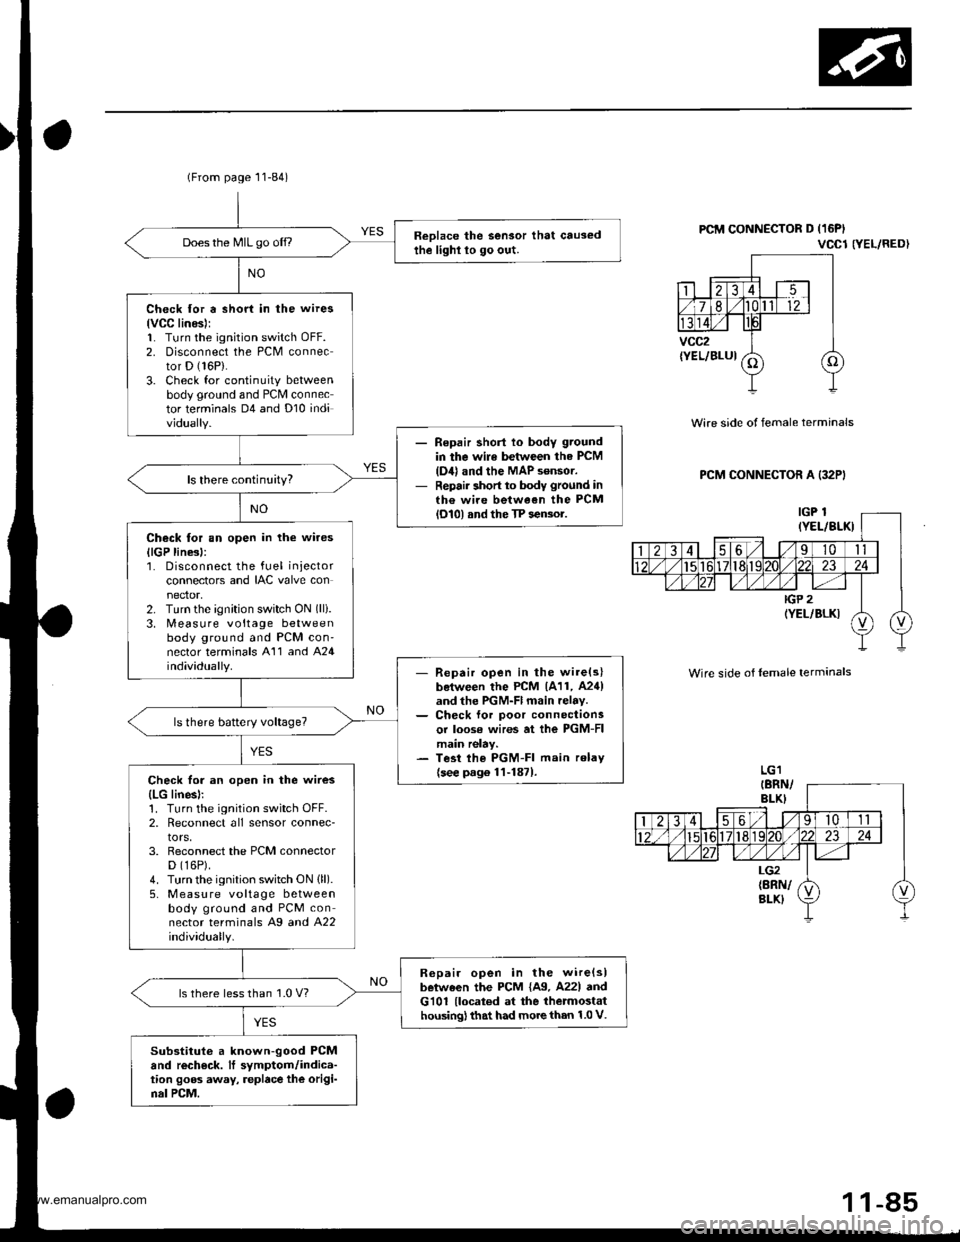 HONDA CR-V 1999 RD1-RD3 / 1.G Service Manual 
(From page 11-84)
Reolace the Sensor that causedthe lighl lo go out.Does the MIL go off.,
Check for a short in the wires
lvCC linesl:1. Turn the ignition switch oFF.2. Disconnect the PCM connector D 